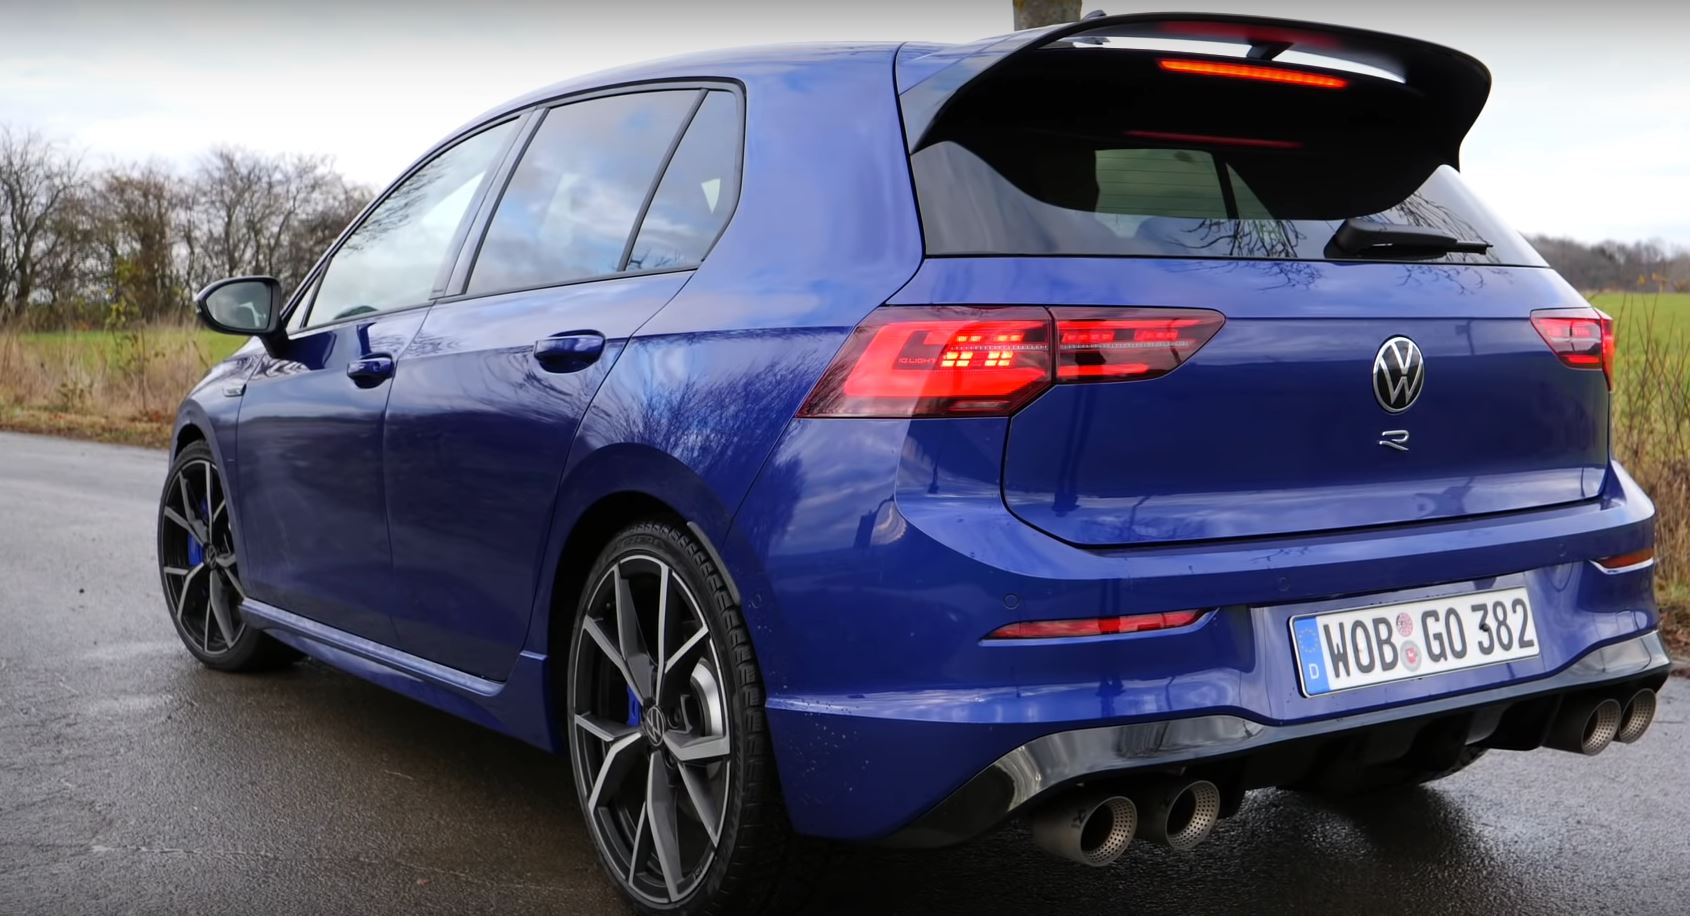 2022 Volkswagen Golf R Hits 62 MPH in 4.4s, Shows